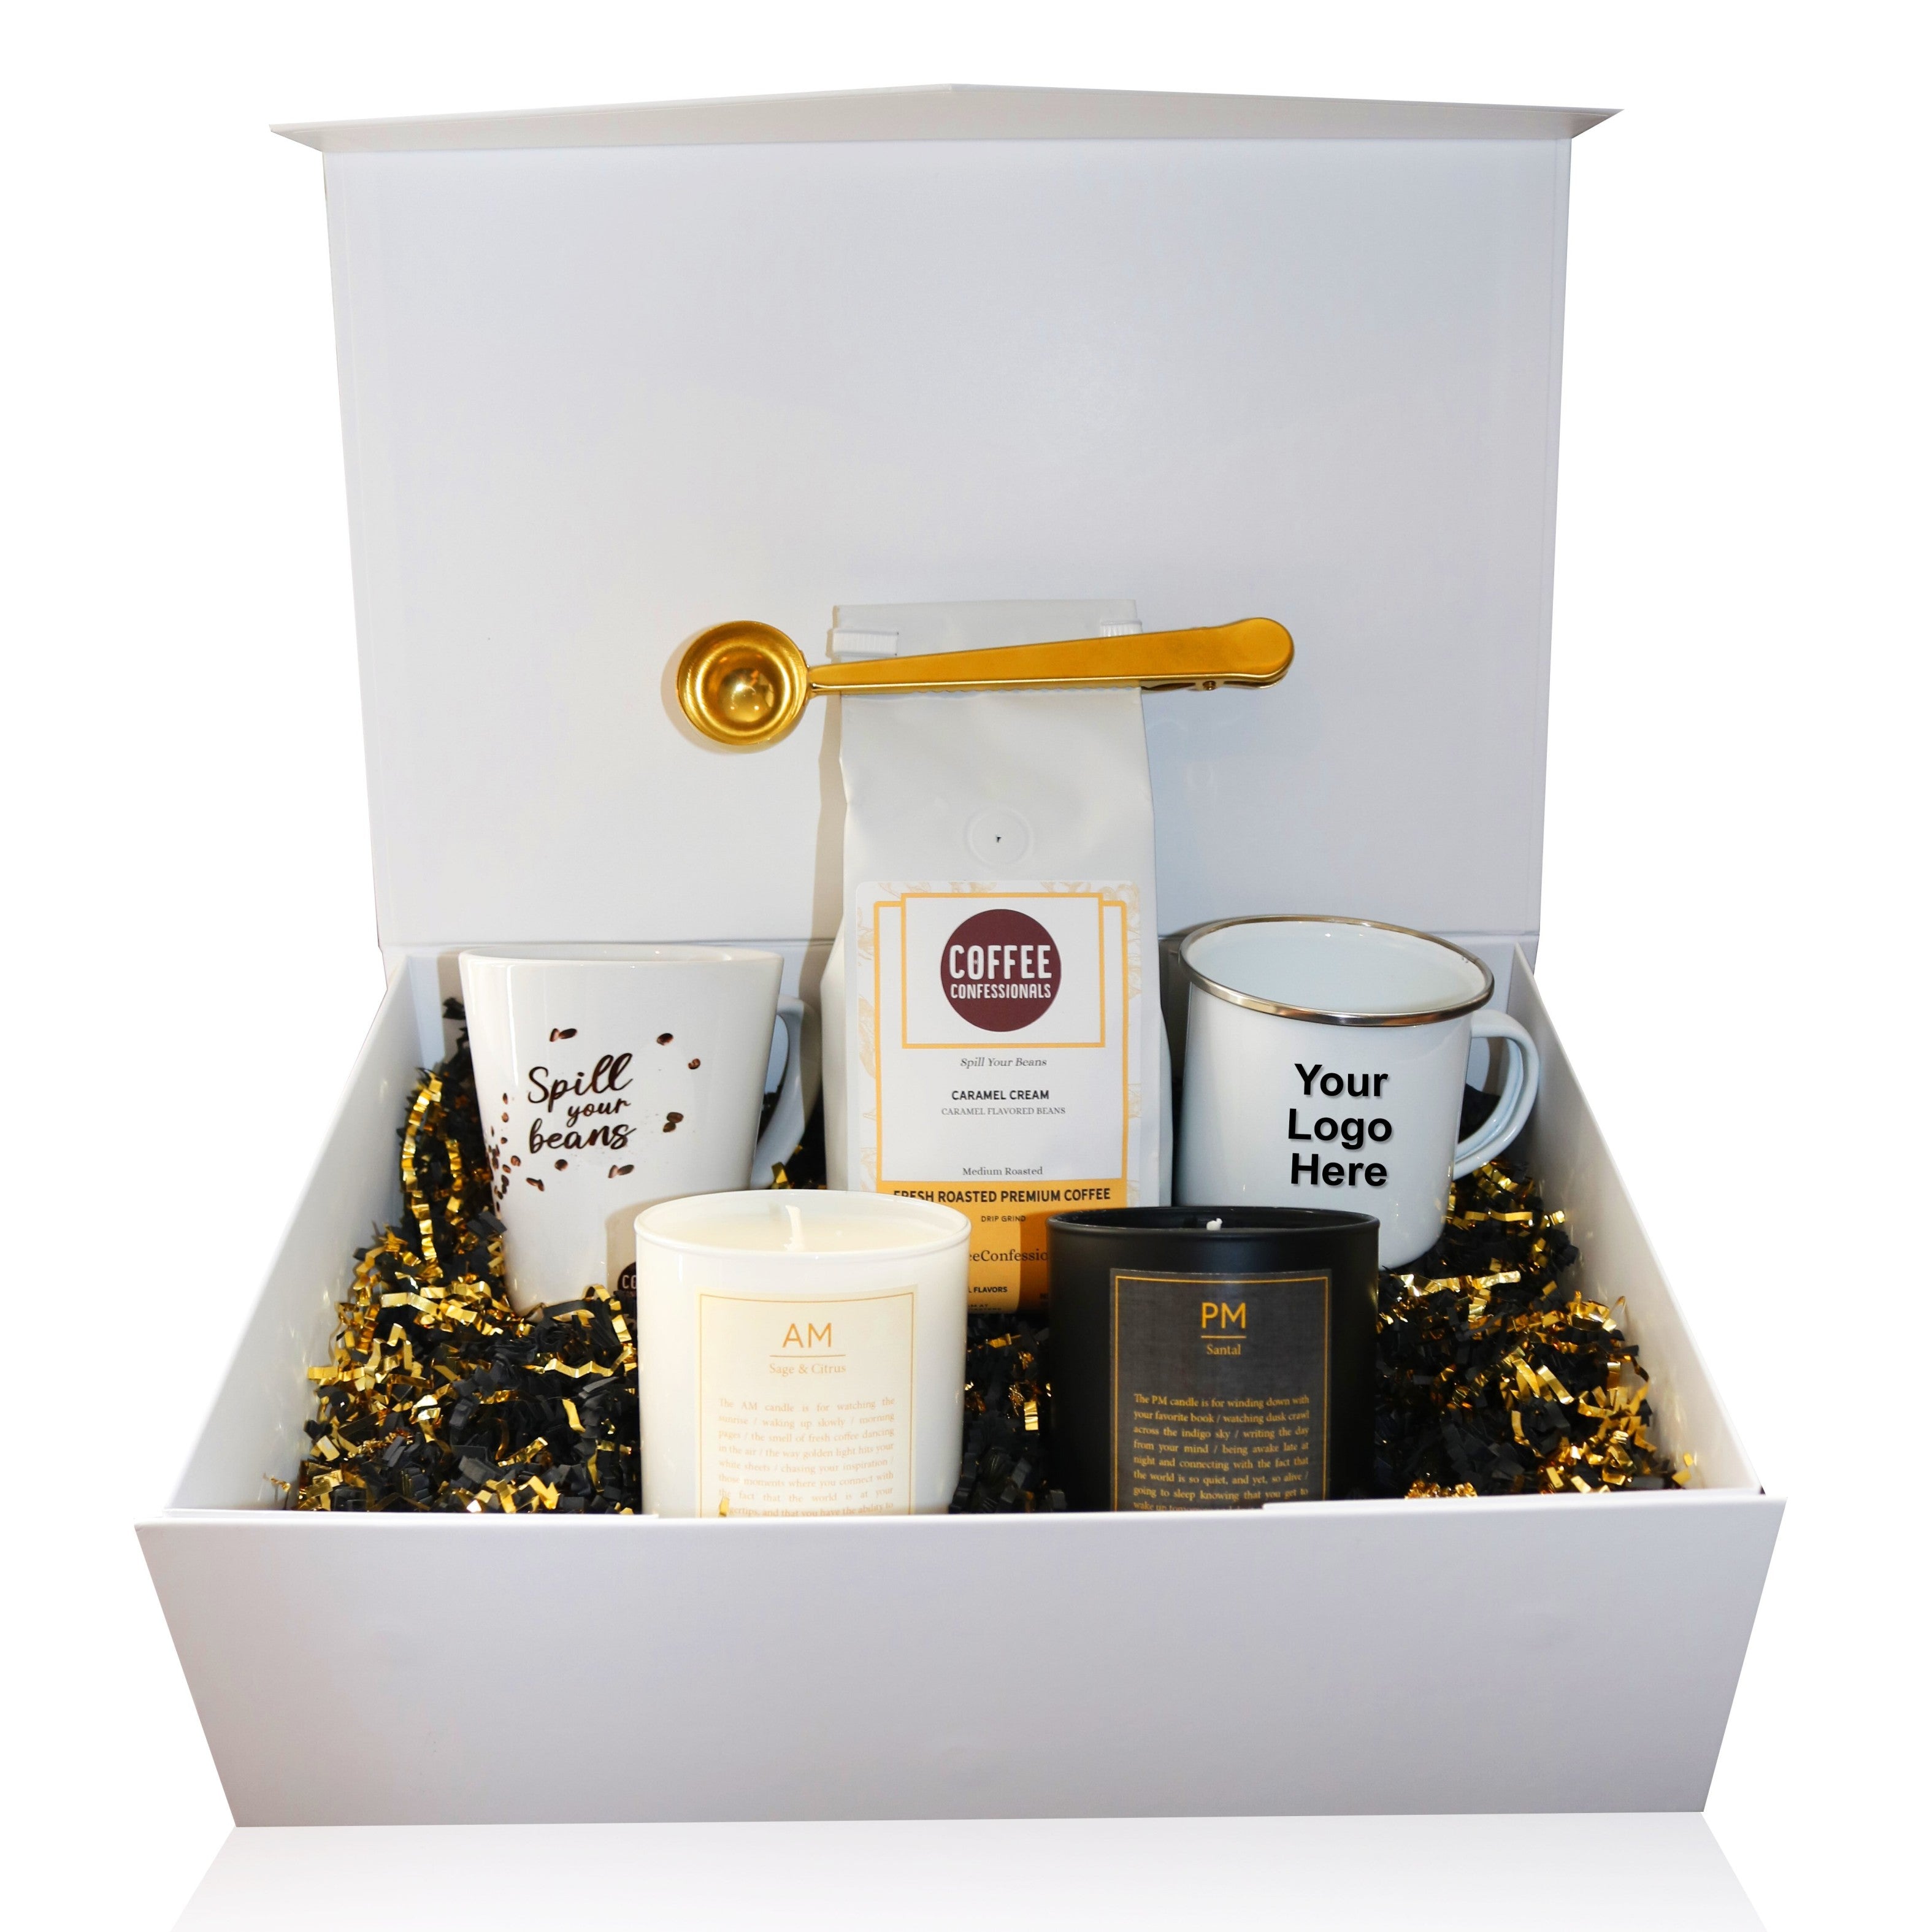 Caramel Coffee Gift Set - Coffee Confessionals